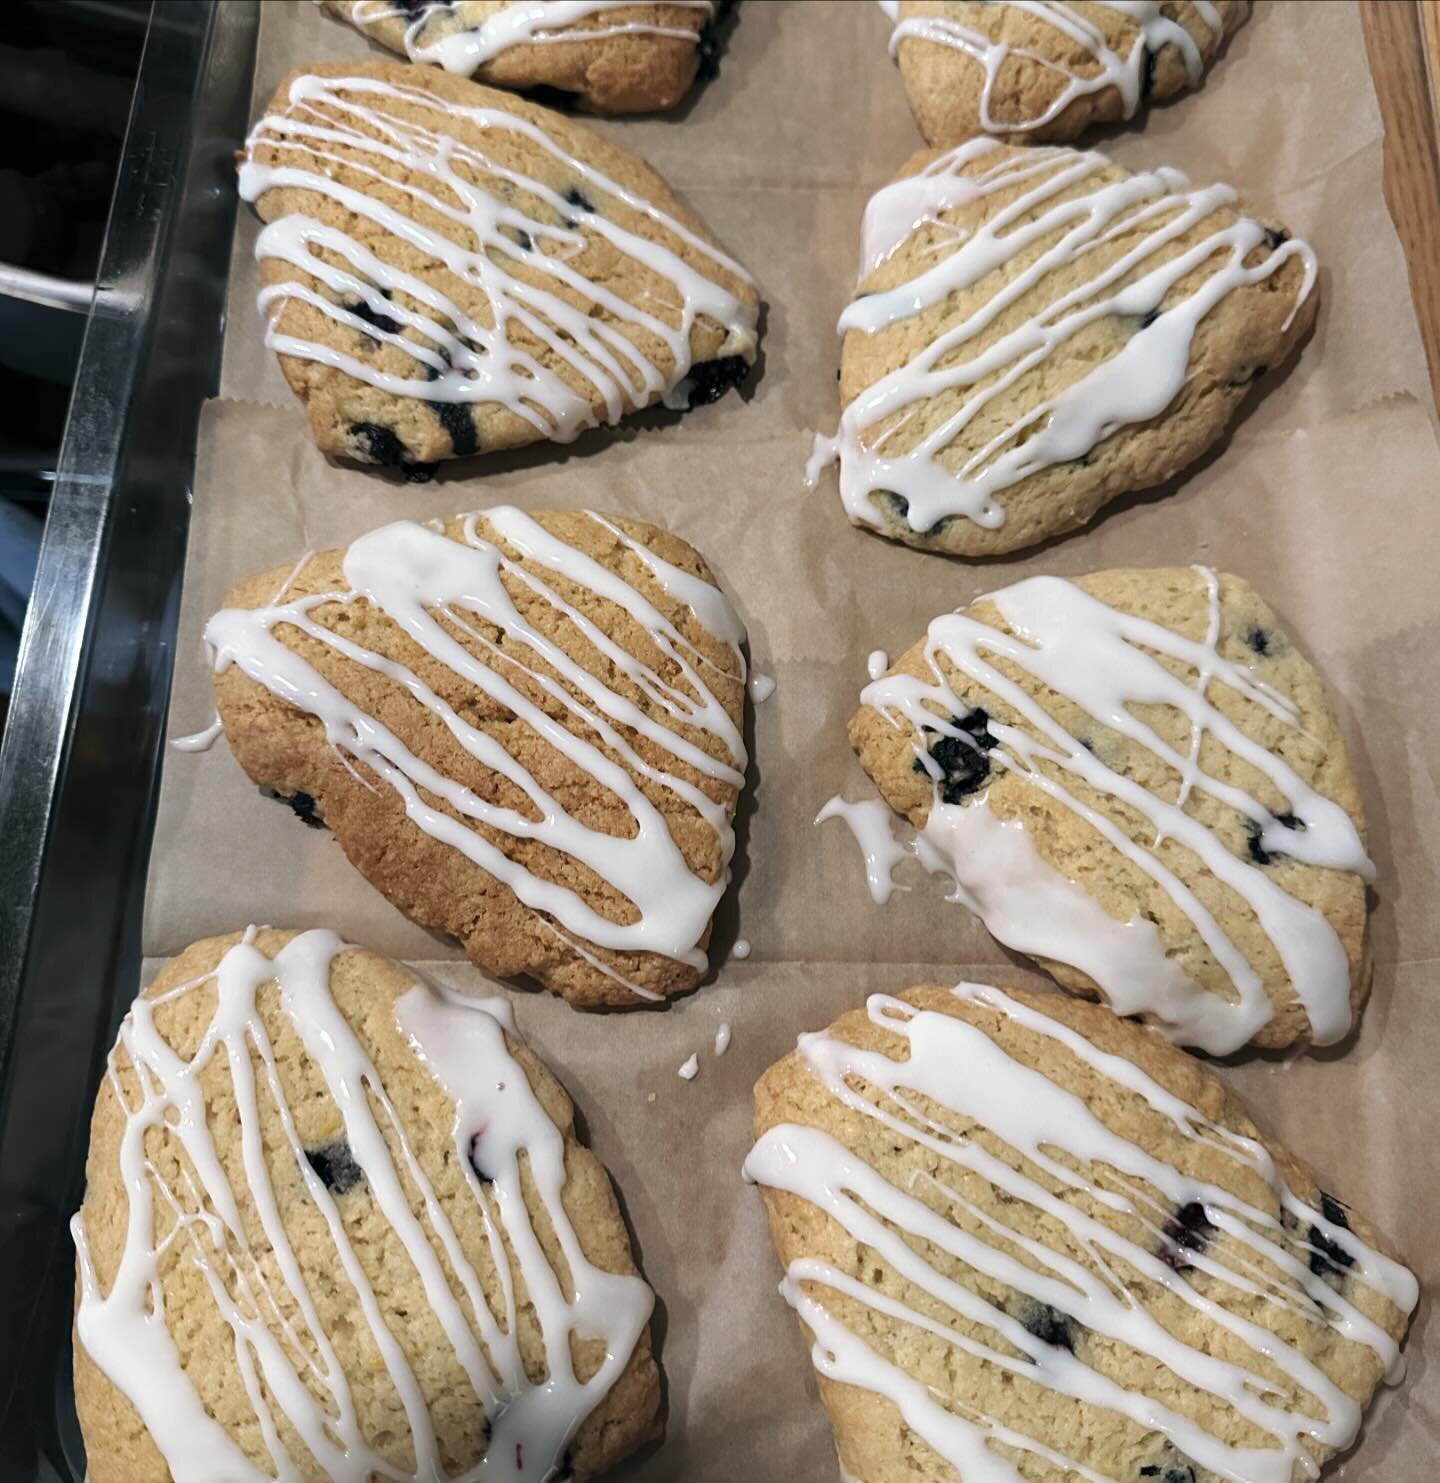 Some OG vegan blueberry scones- if you want them you gotta get your waders on and earn them😁 🌧️ ☔️